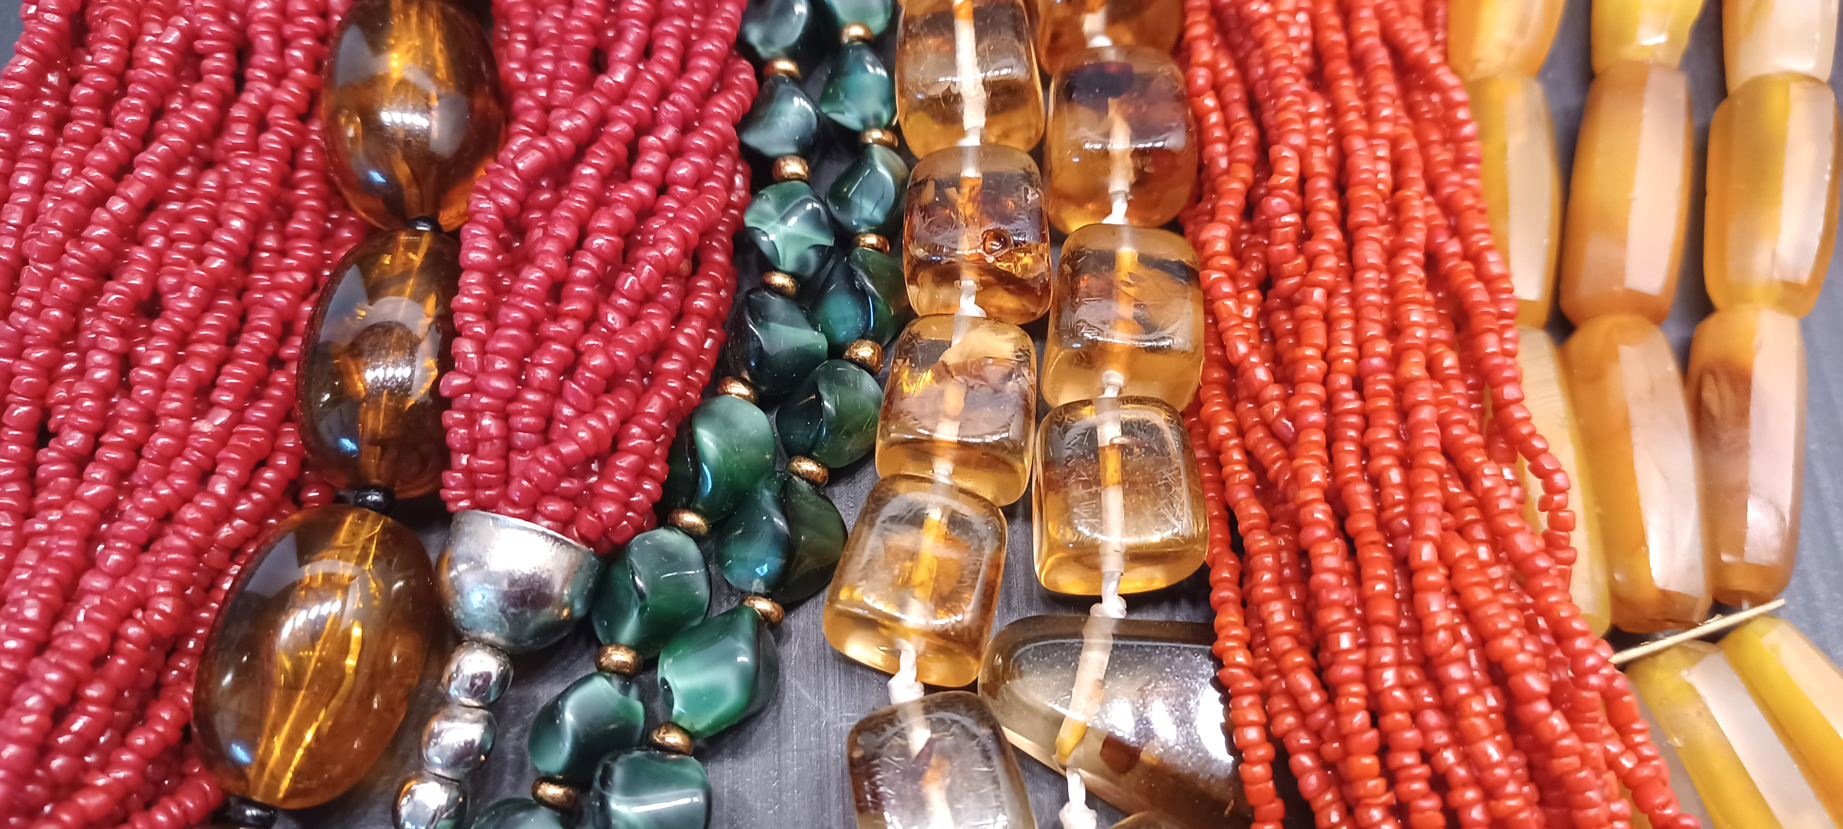 SIX BEADED NECKLACES - INC. AMBER, CORAL ETC.  - Image 2 of 3